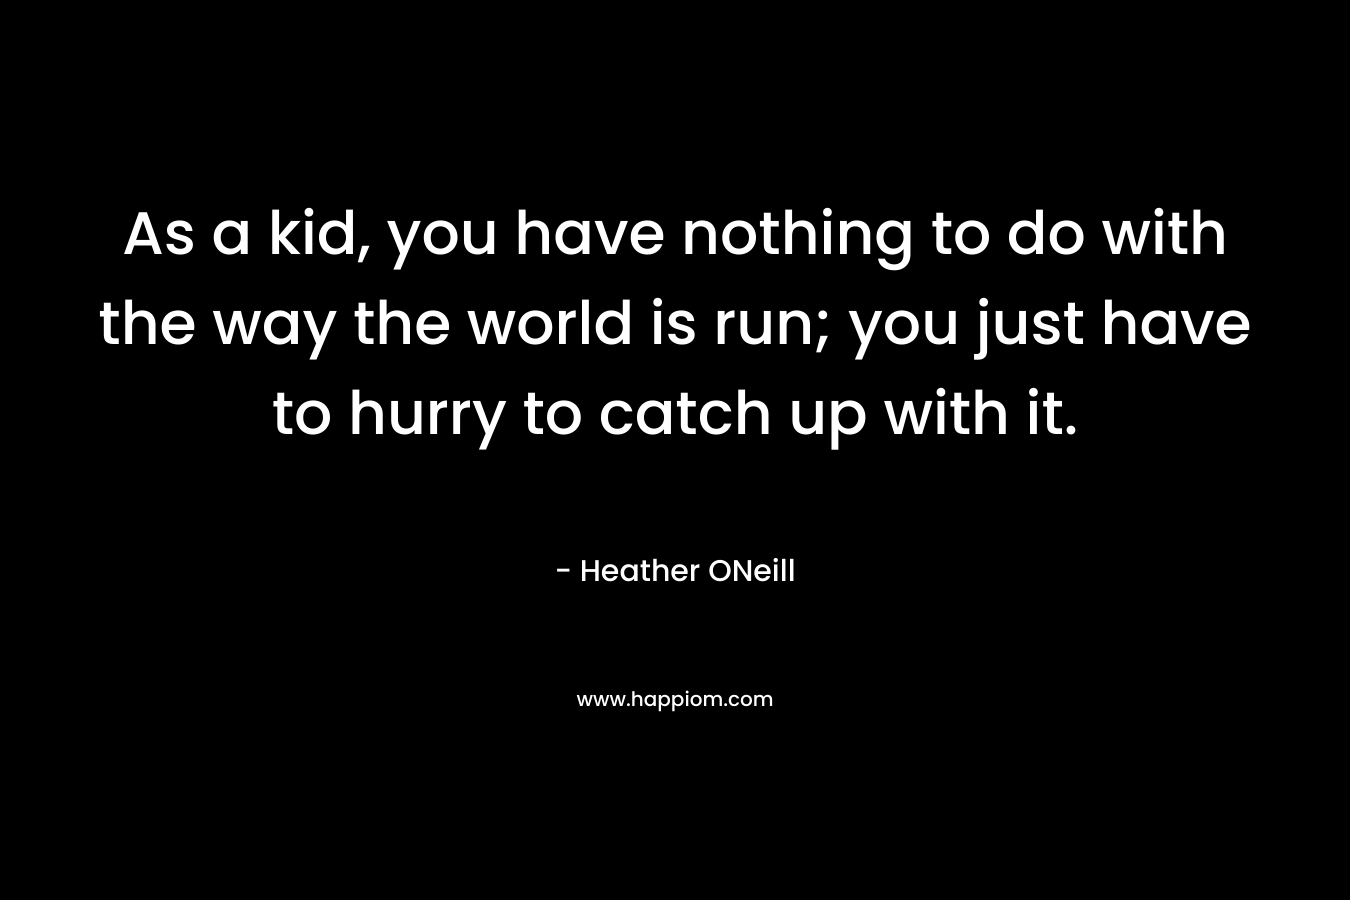 As a kid, you have nothing to do with the way the world is run; you just have to hurry to catch up with it. – Heather ONeill